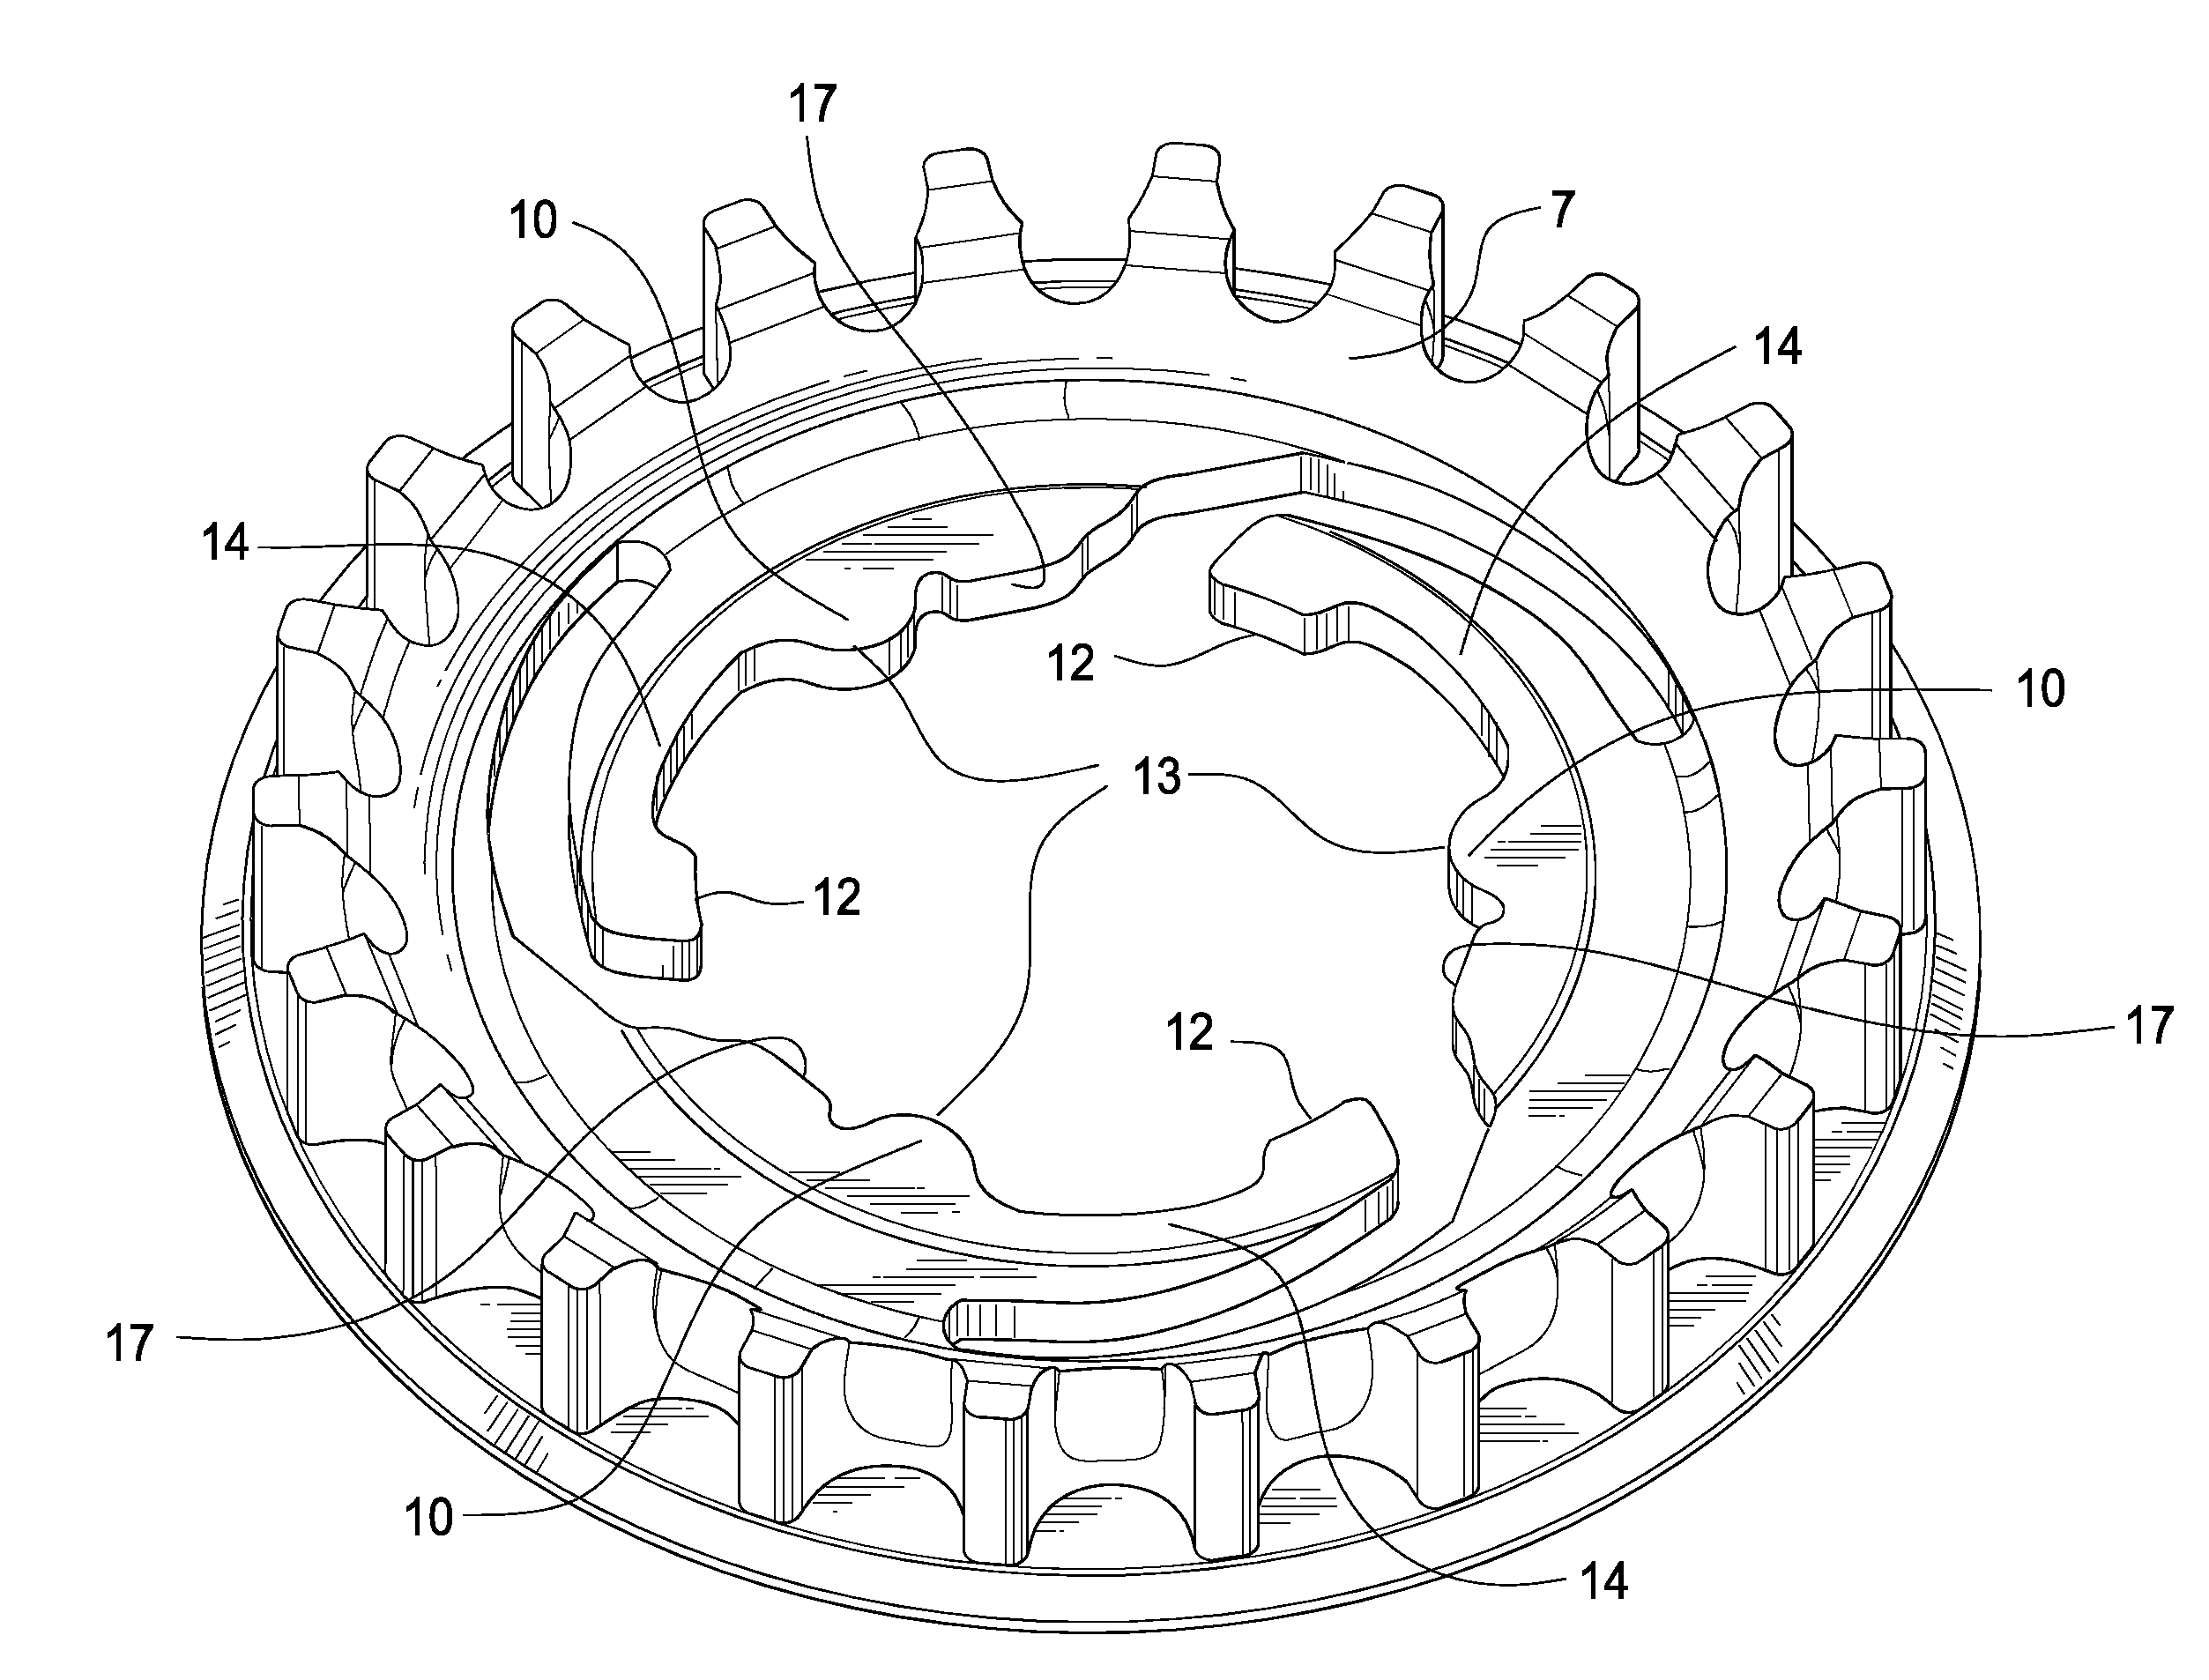 Toothed sprocket with elastic centering element